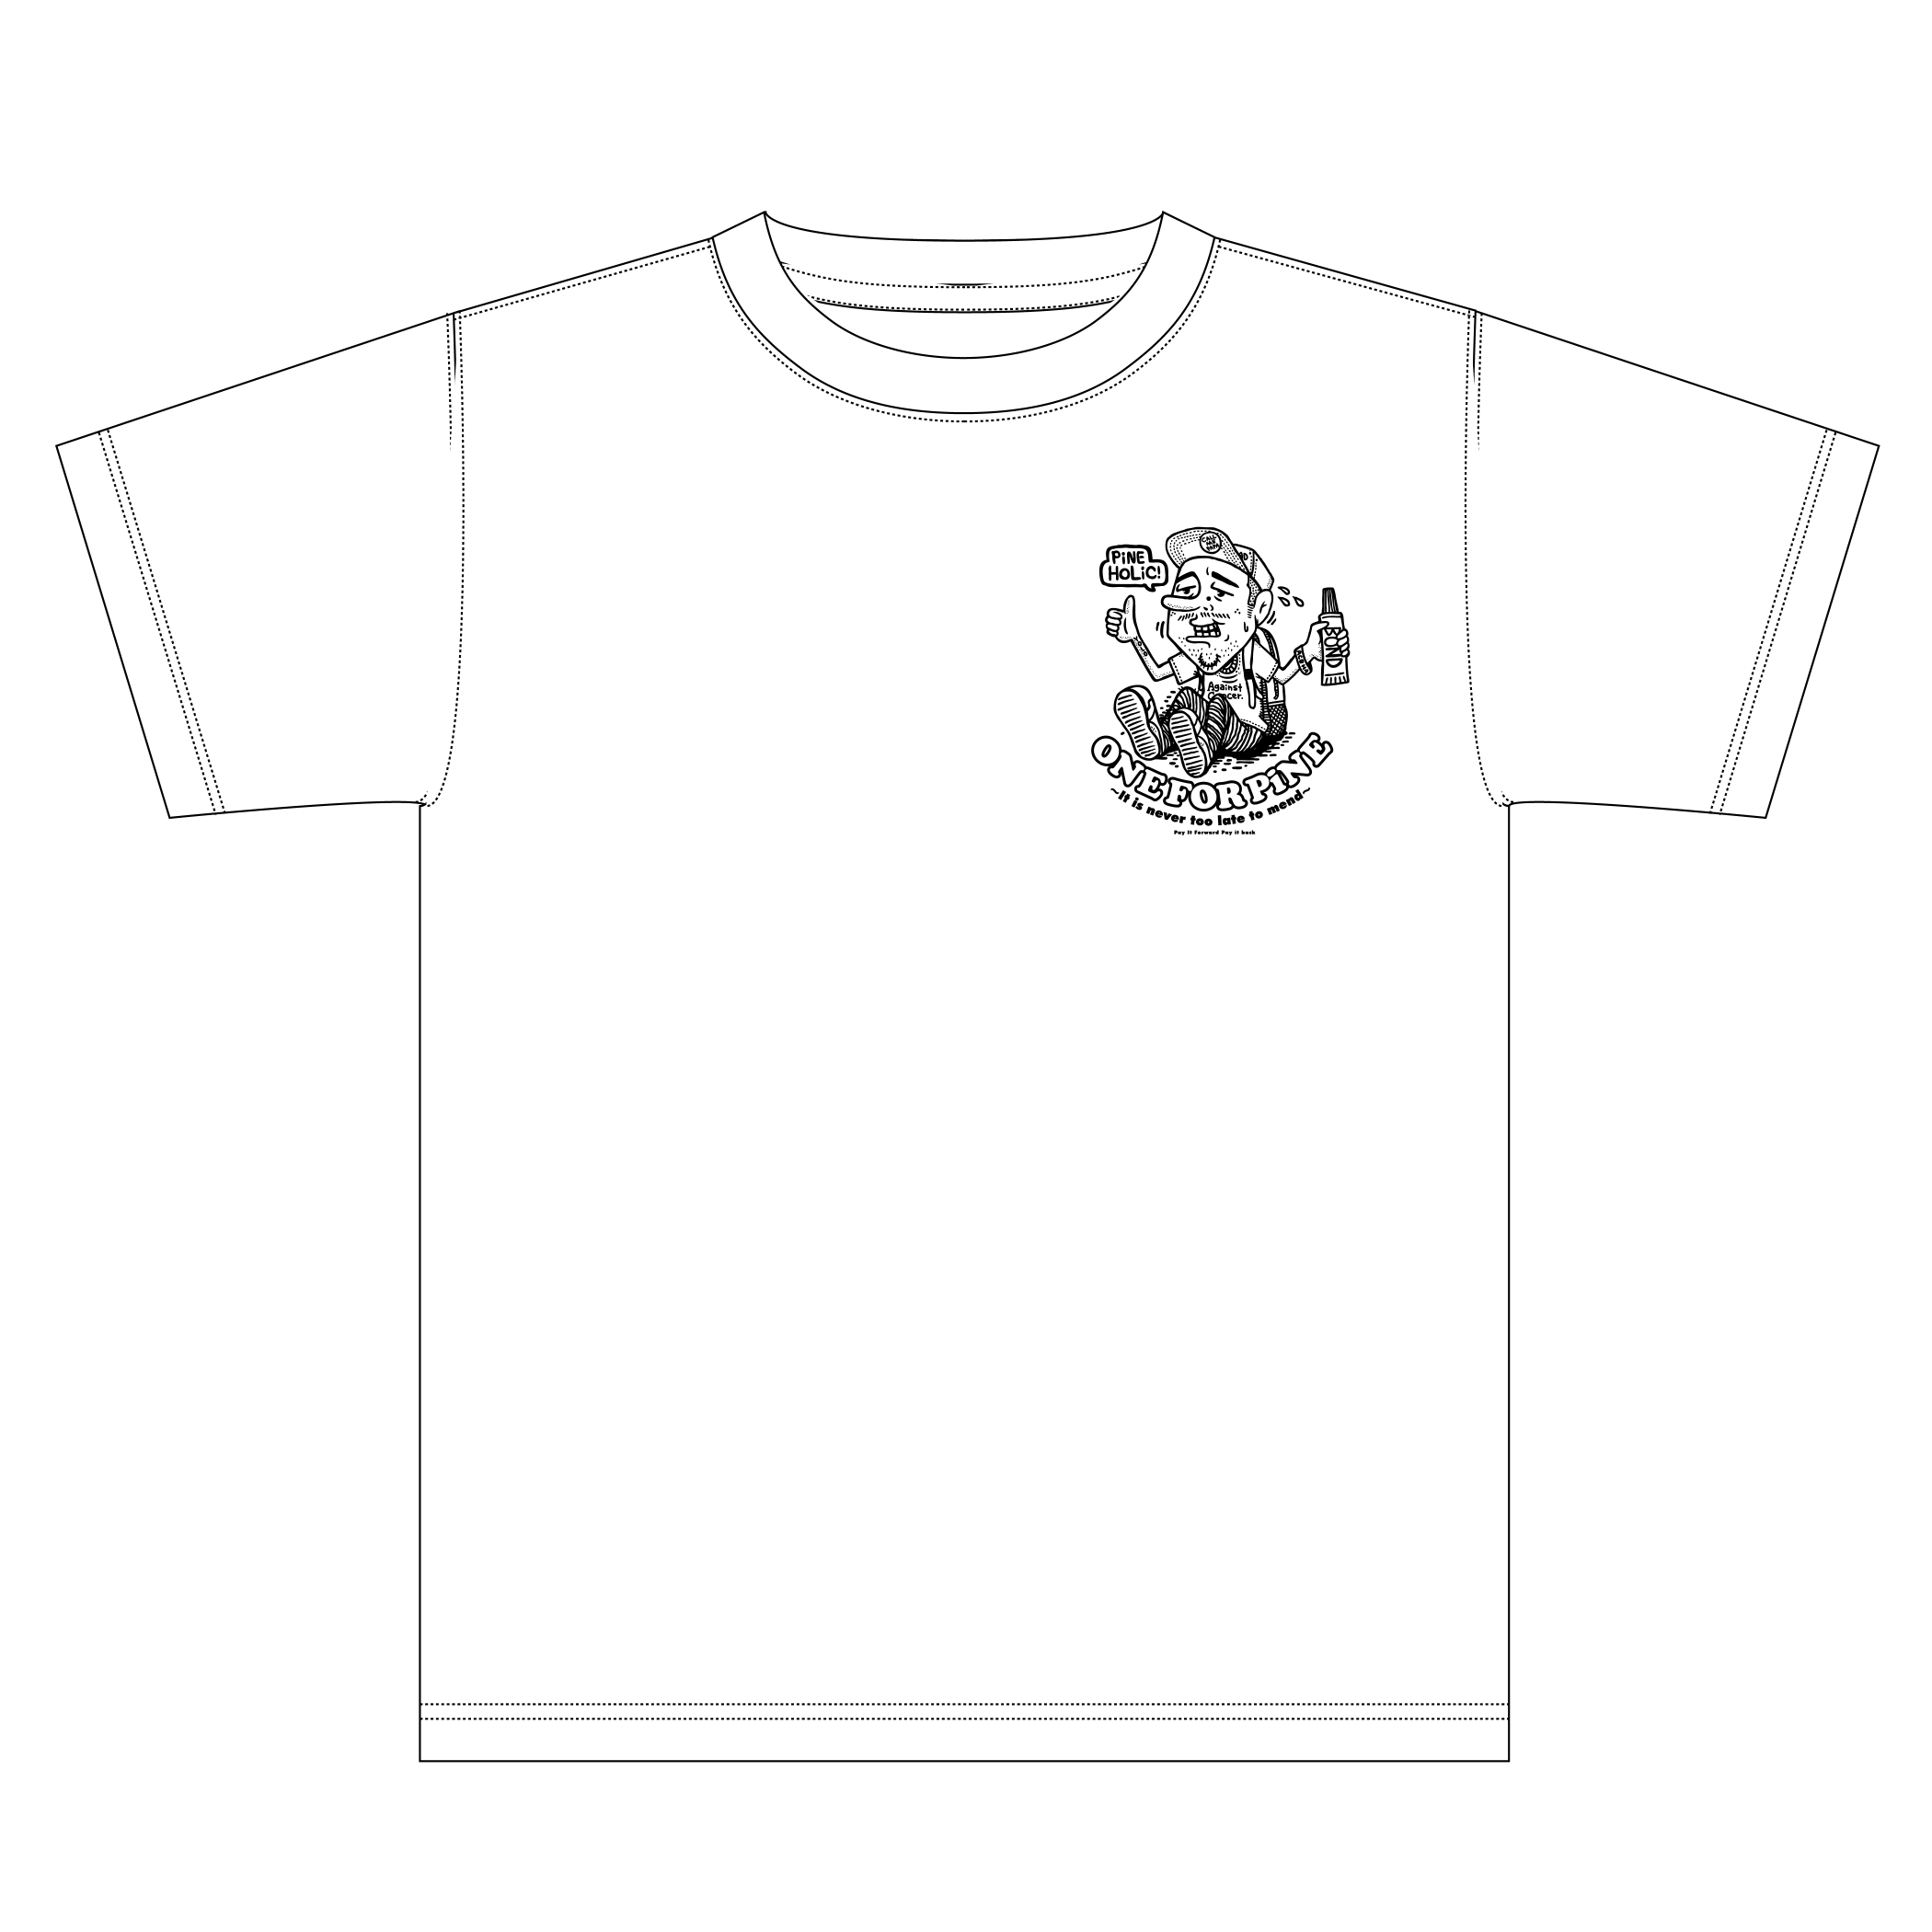 ONE FOR PiNE ロゴ・チャリティーTシャツ